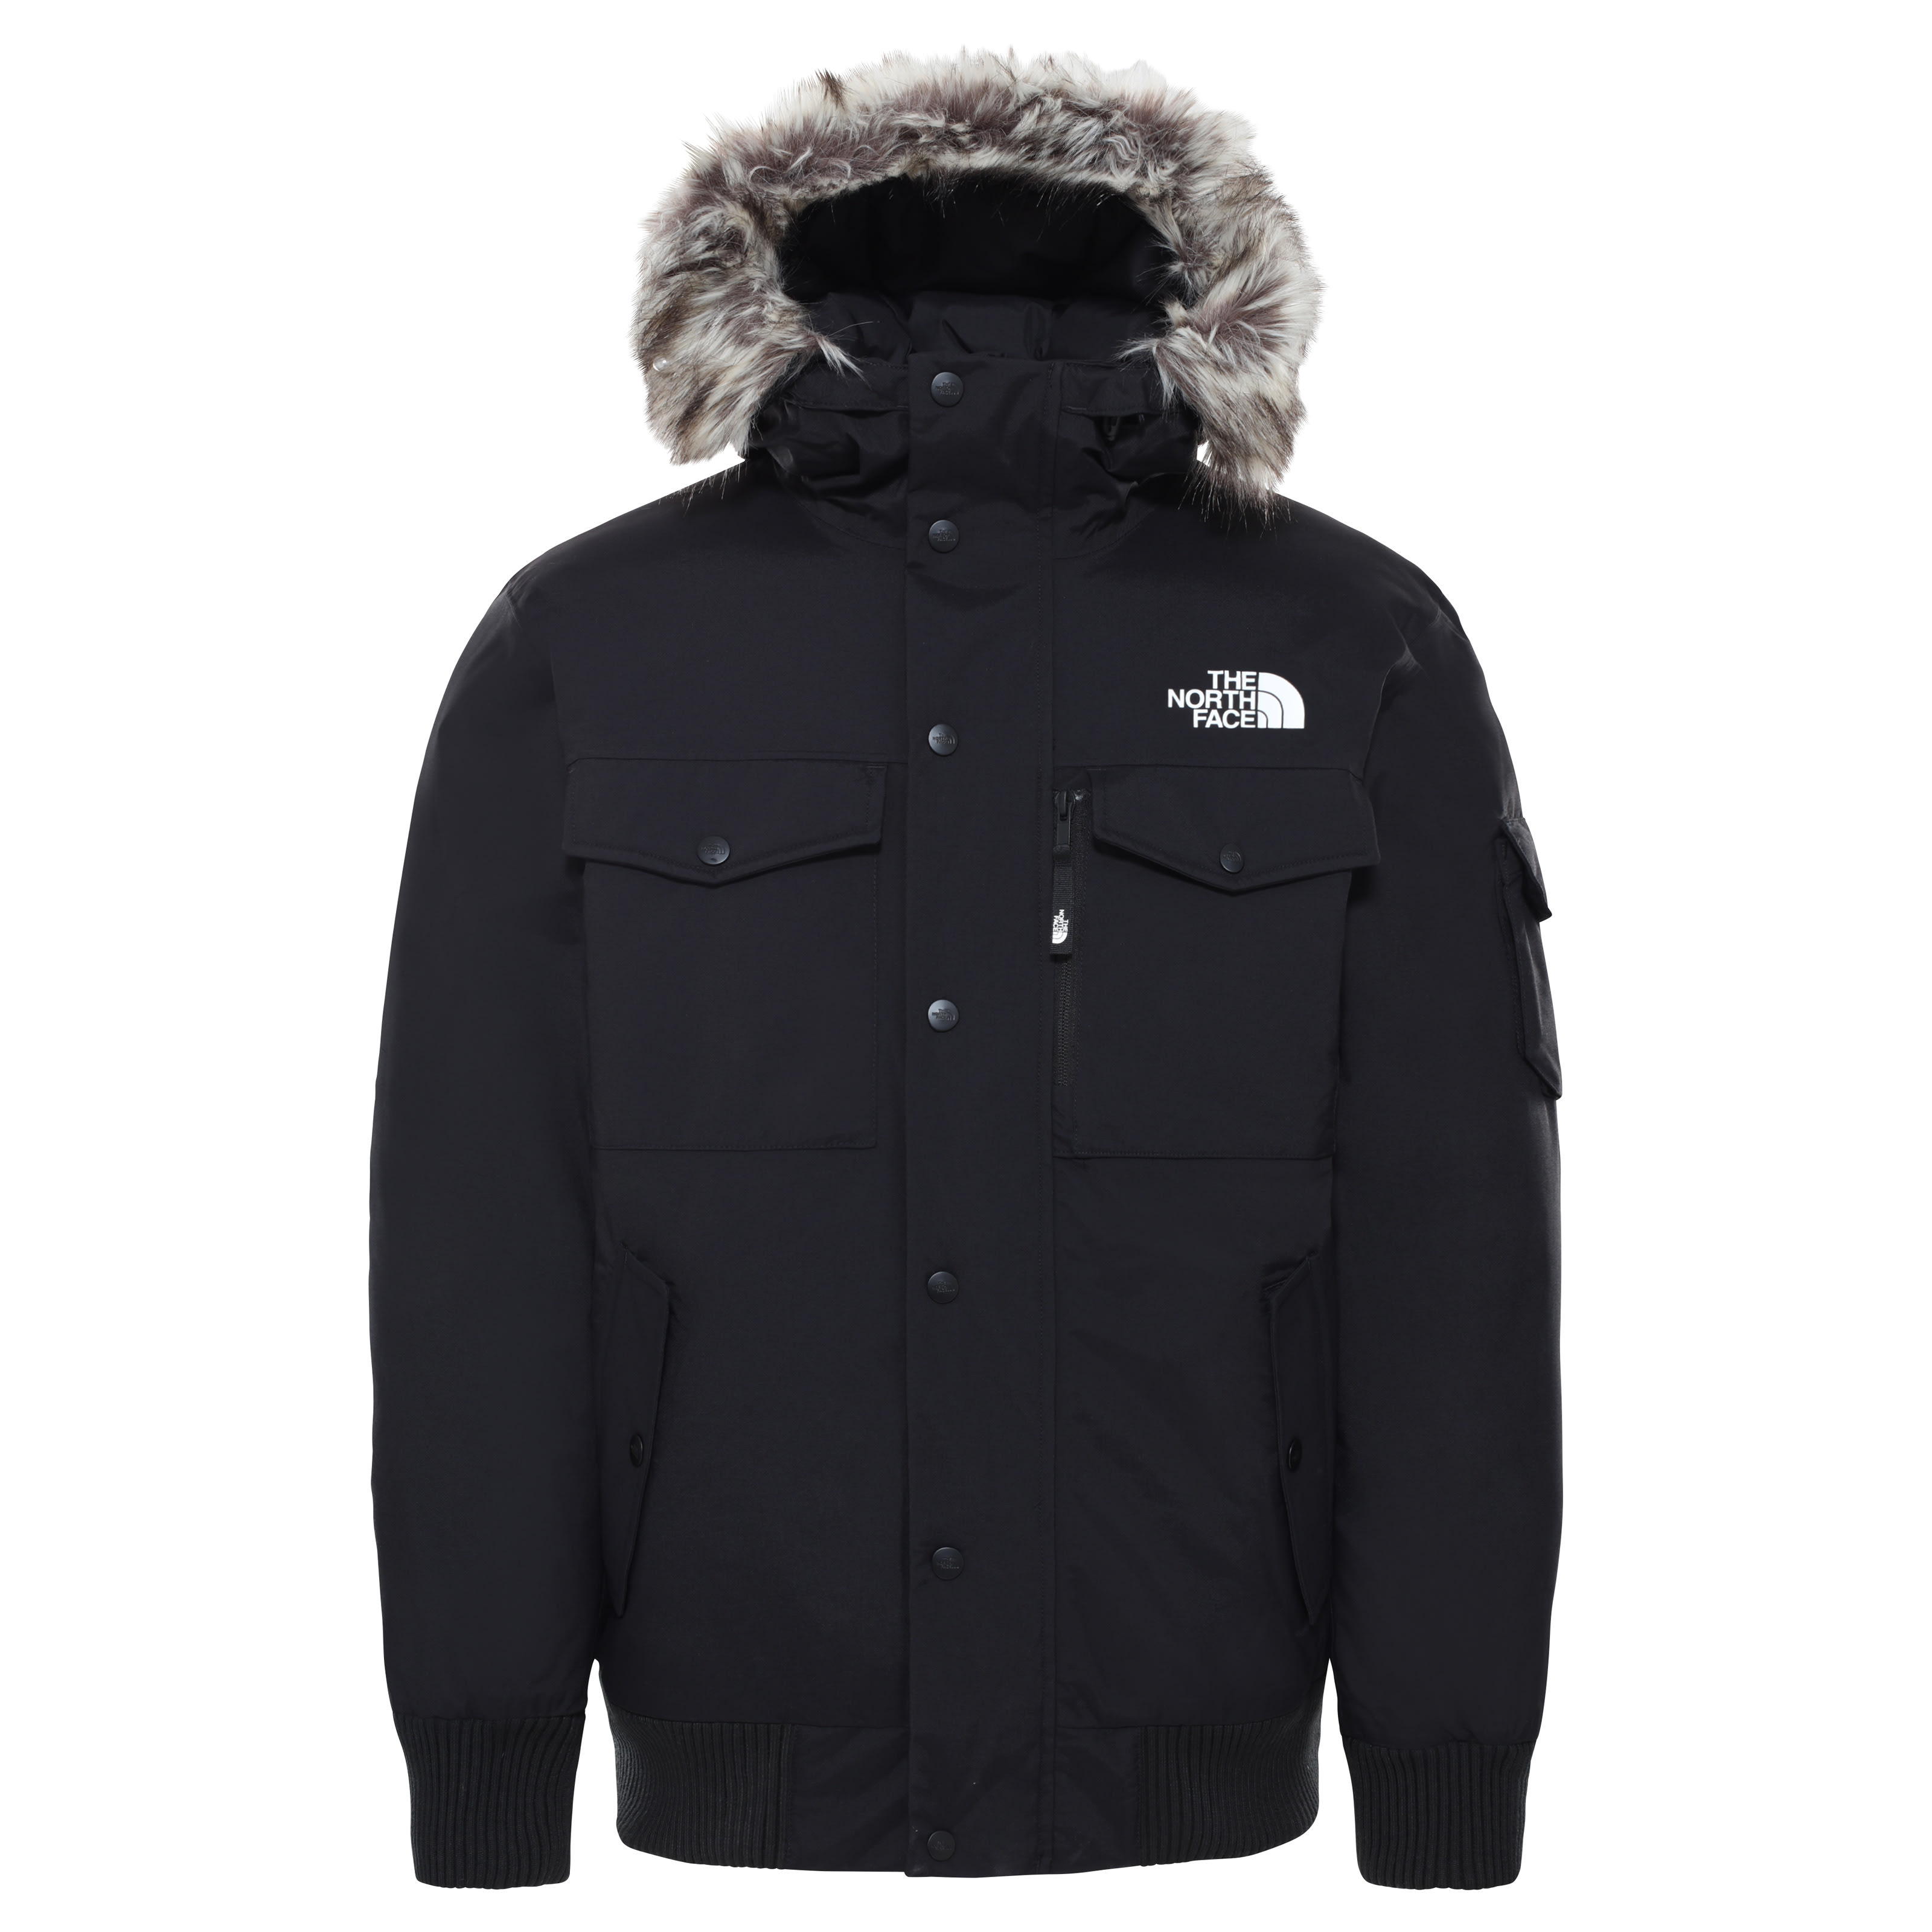 Buy The North  Face  Men s Recycled Gotham Jacket from Outnorth